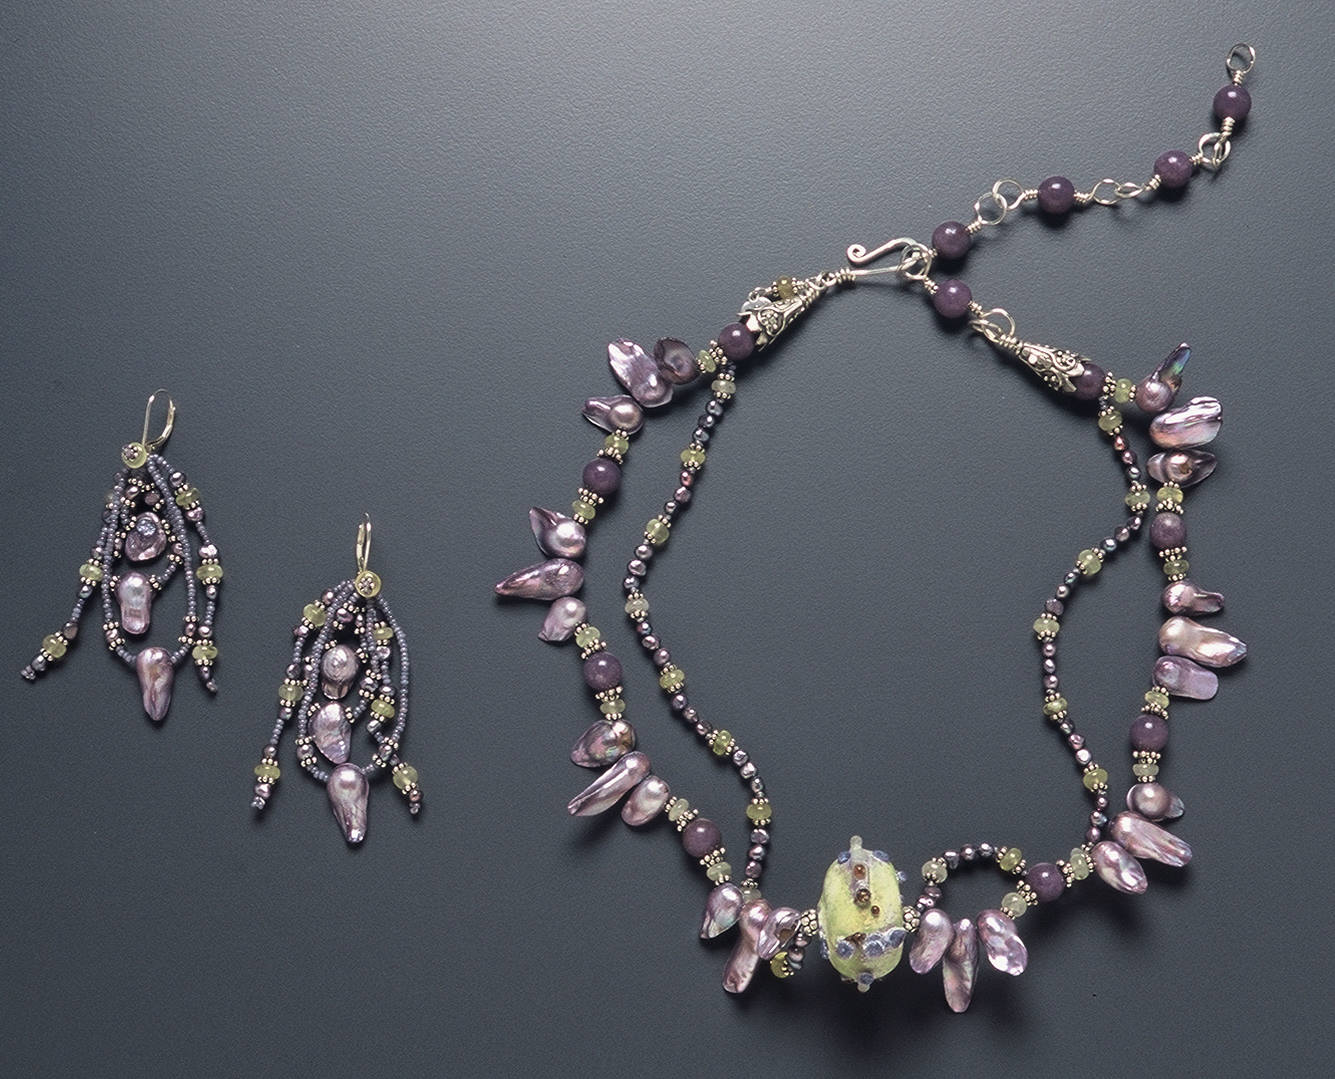 Detail of Lavender and Lime Necklace